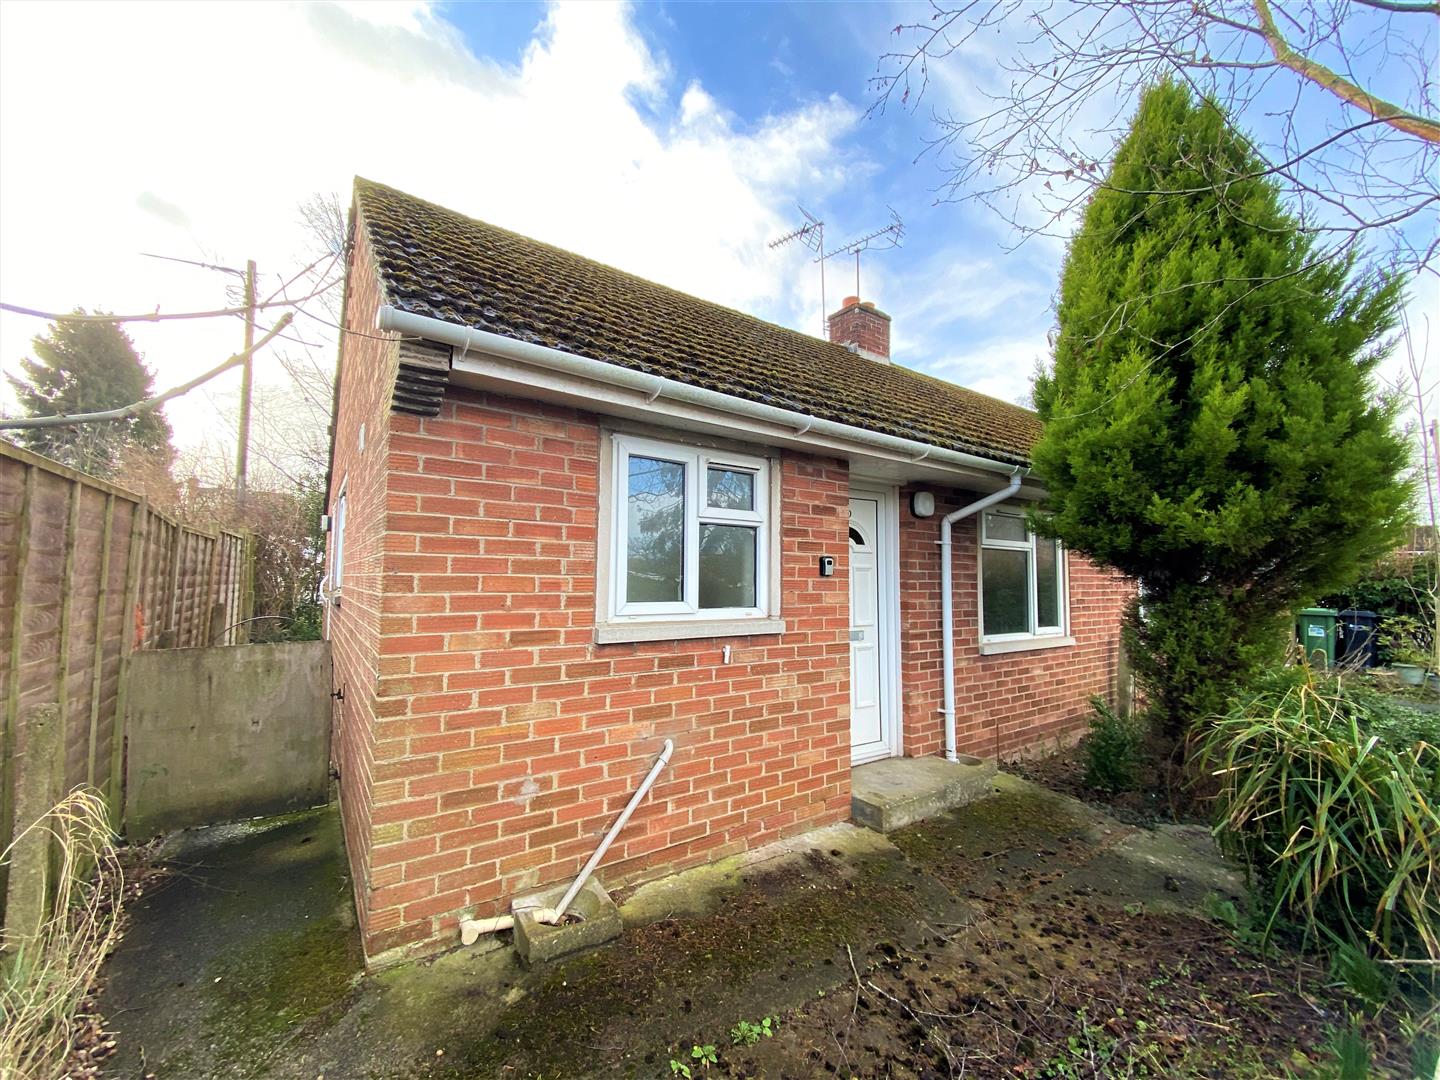 1 bed semi-detached bungalow for sale in Luston, HR6